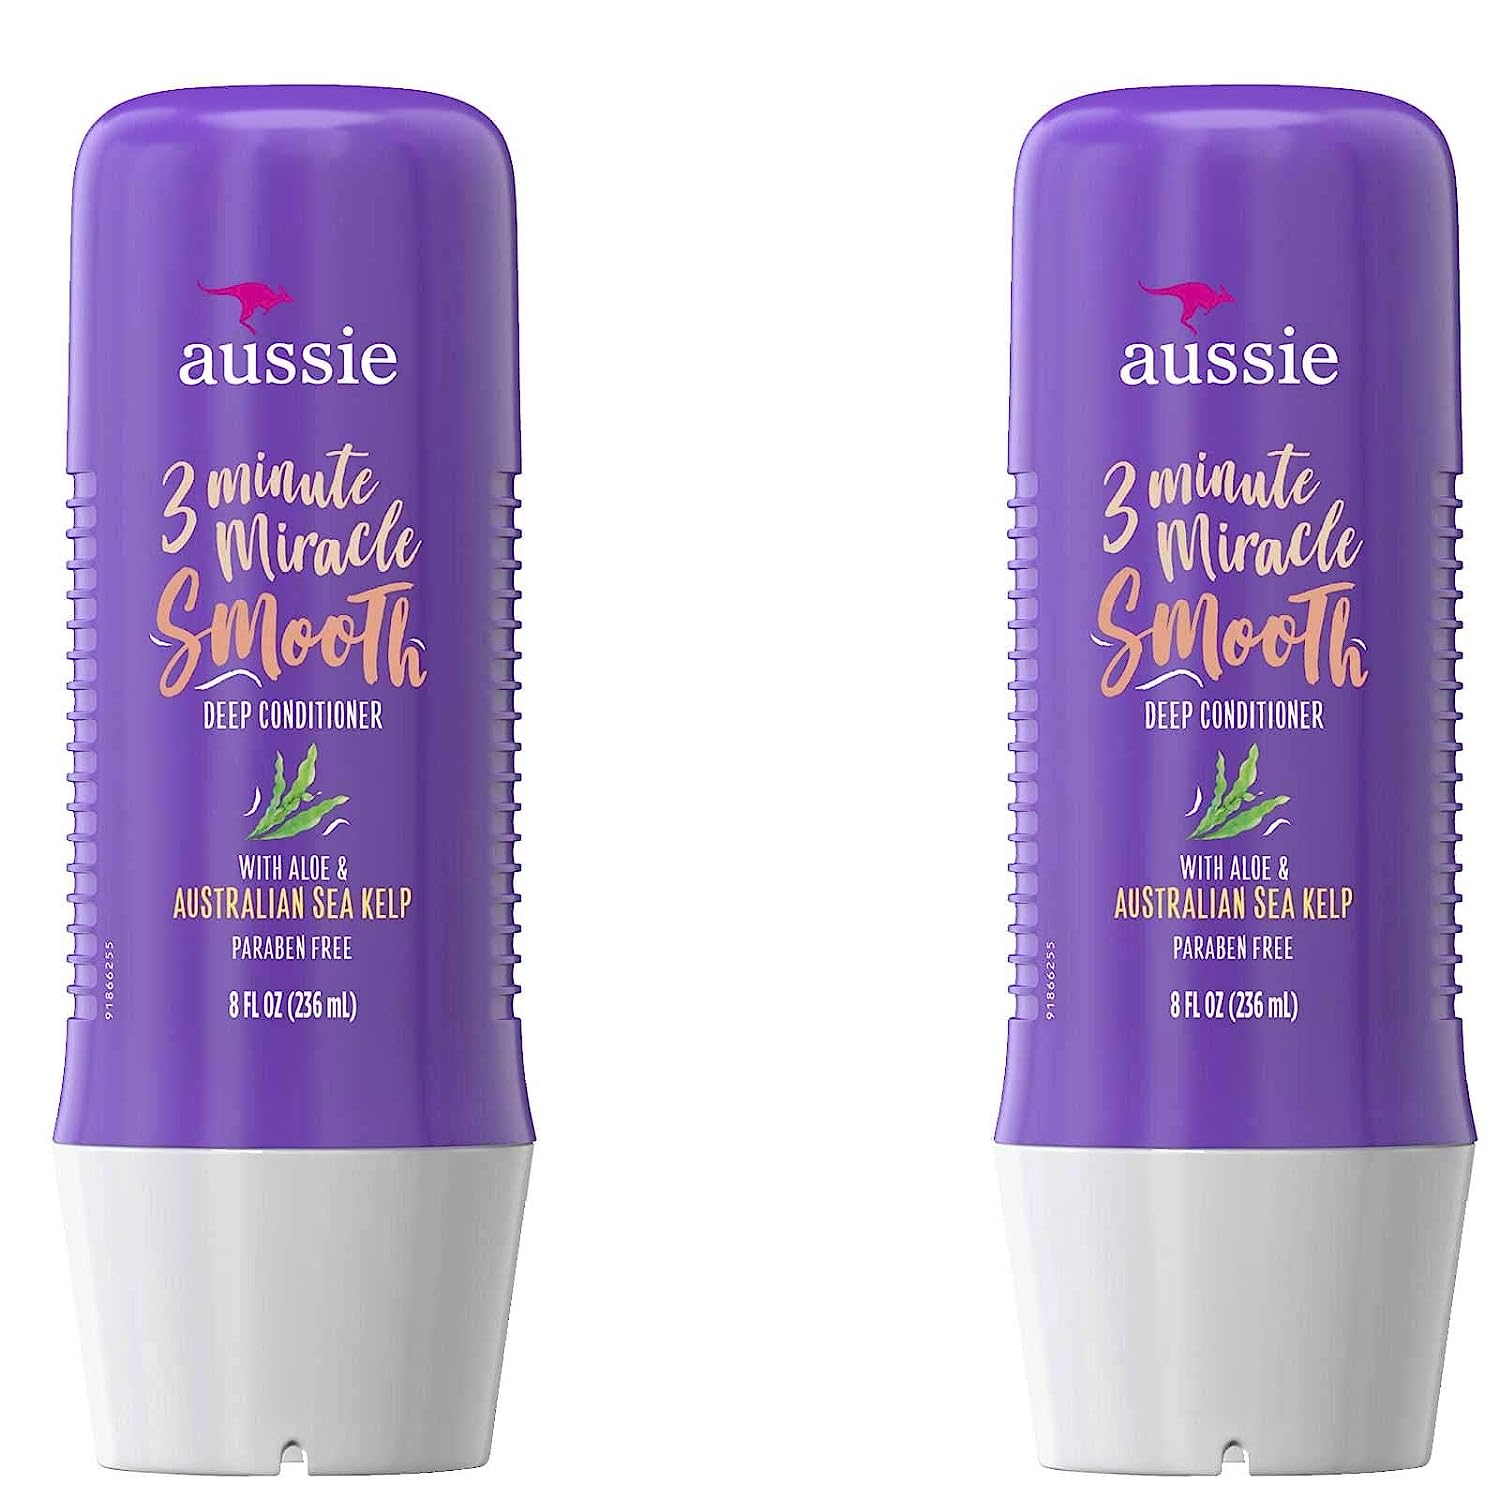 Aussie 3 Minute Miracle Smooth Deep Conditioner 8 oz [...]